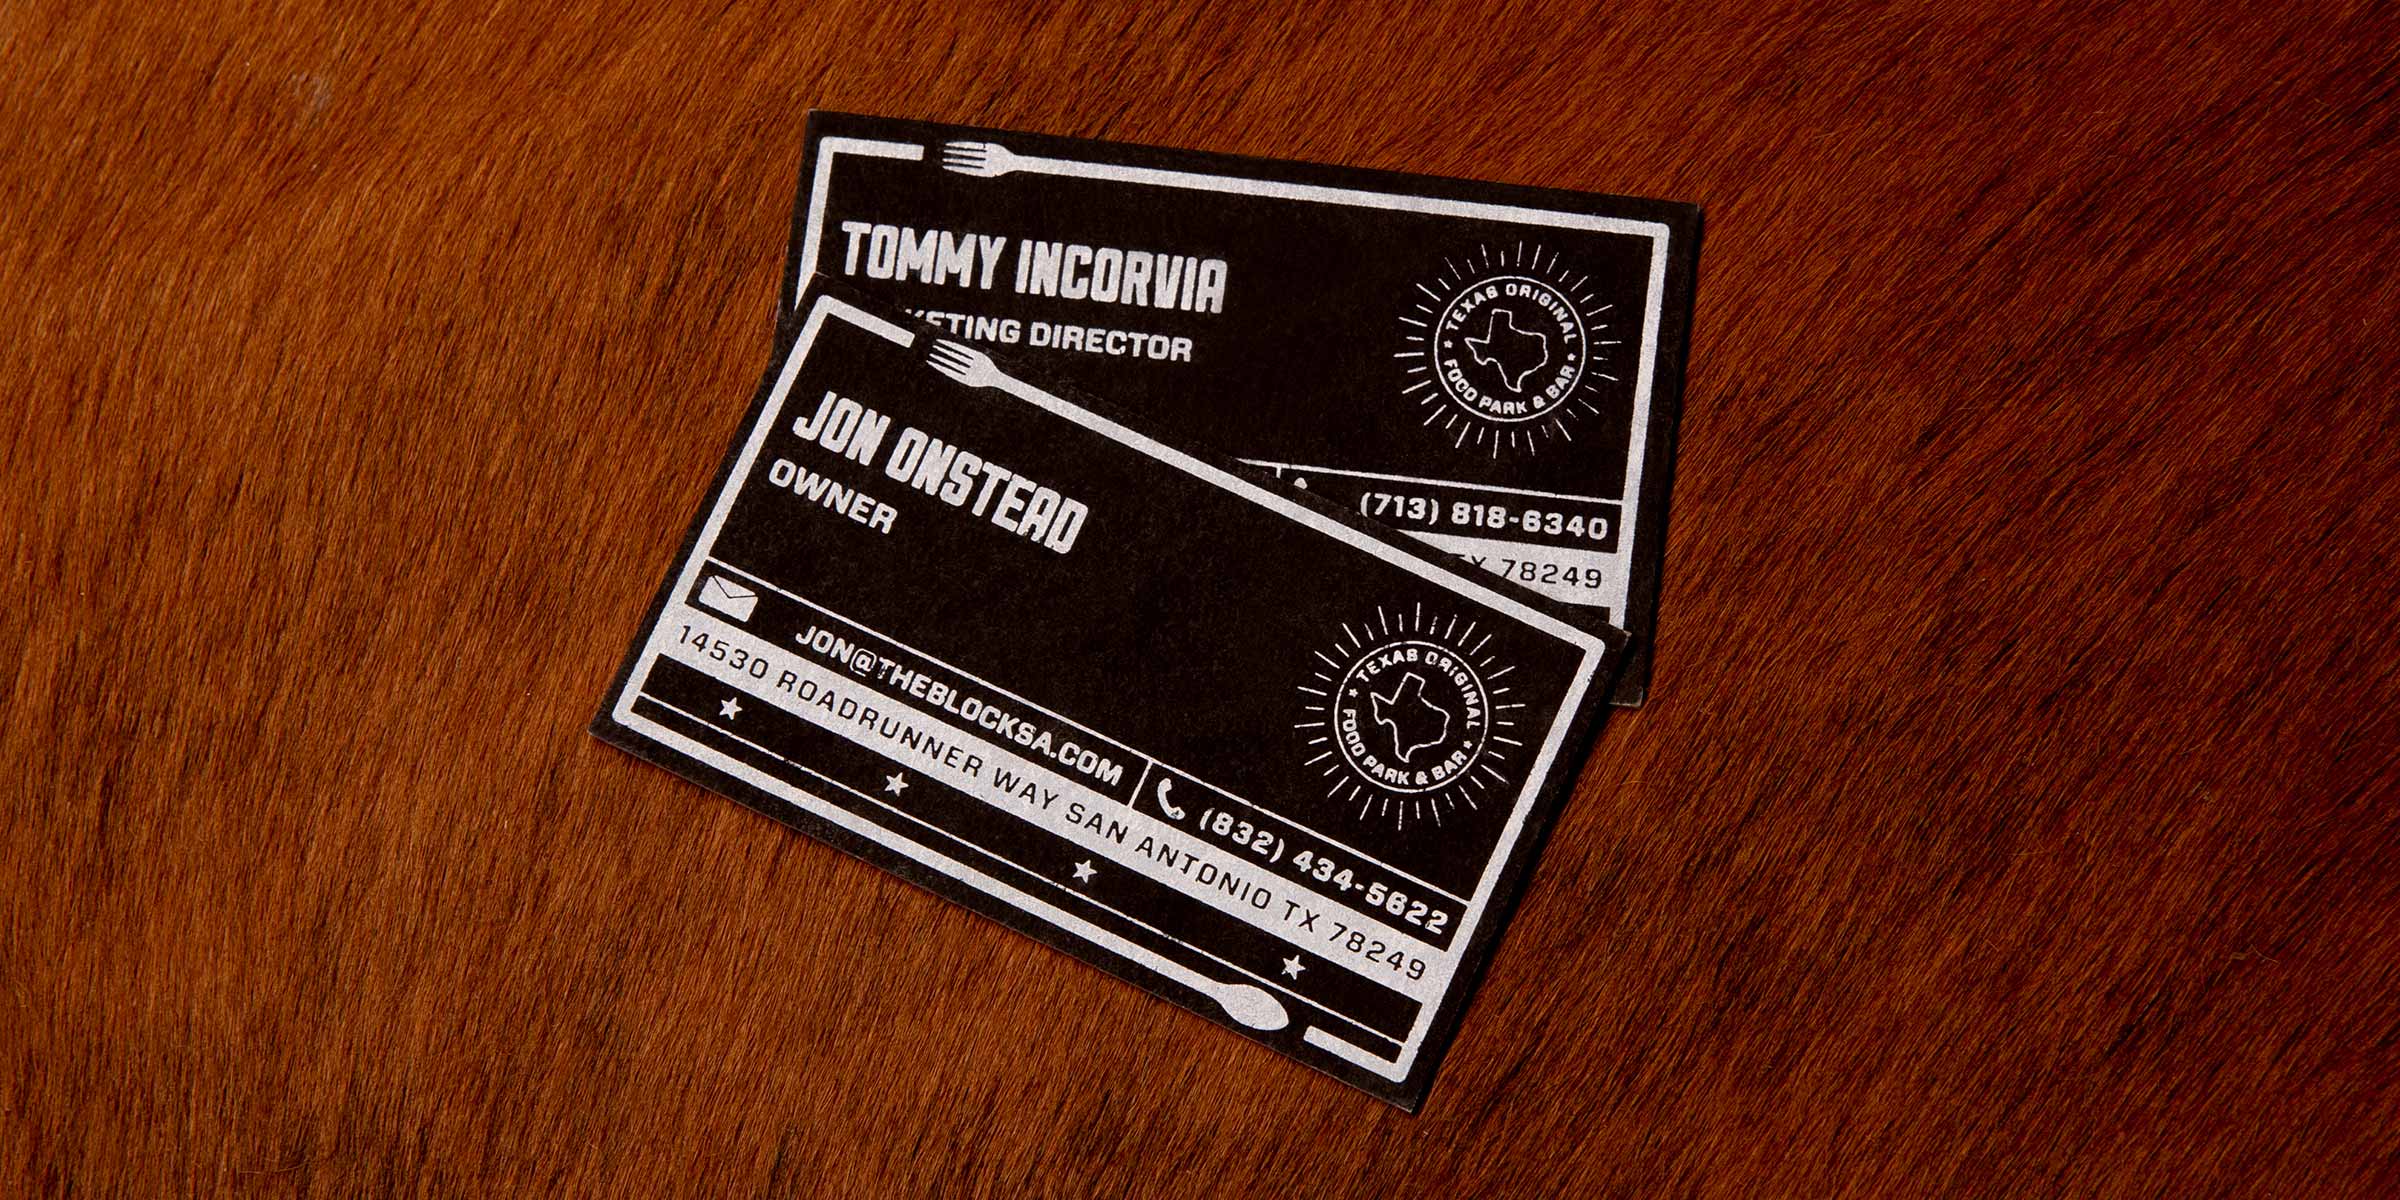 Screenprinted business cards